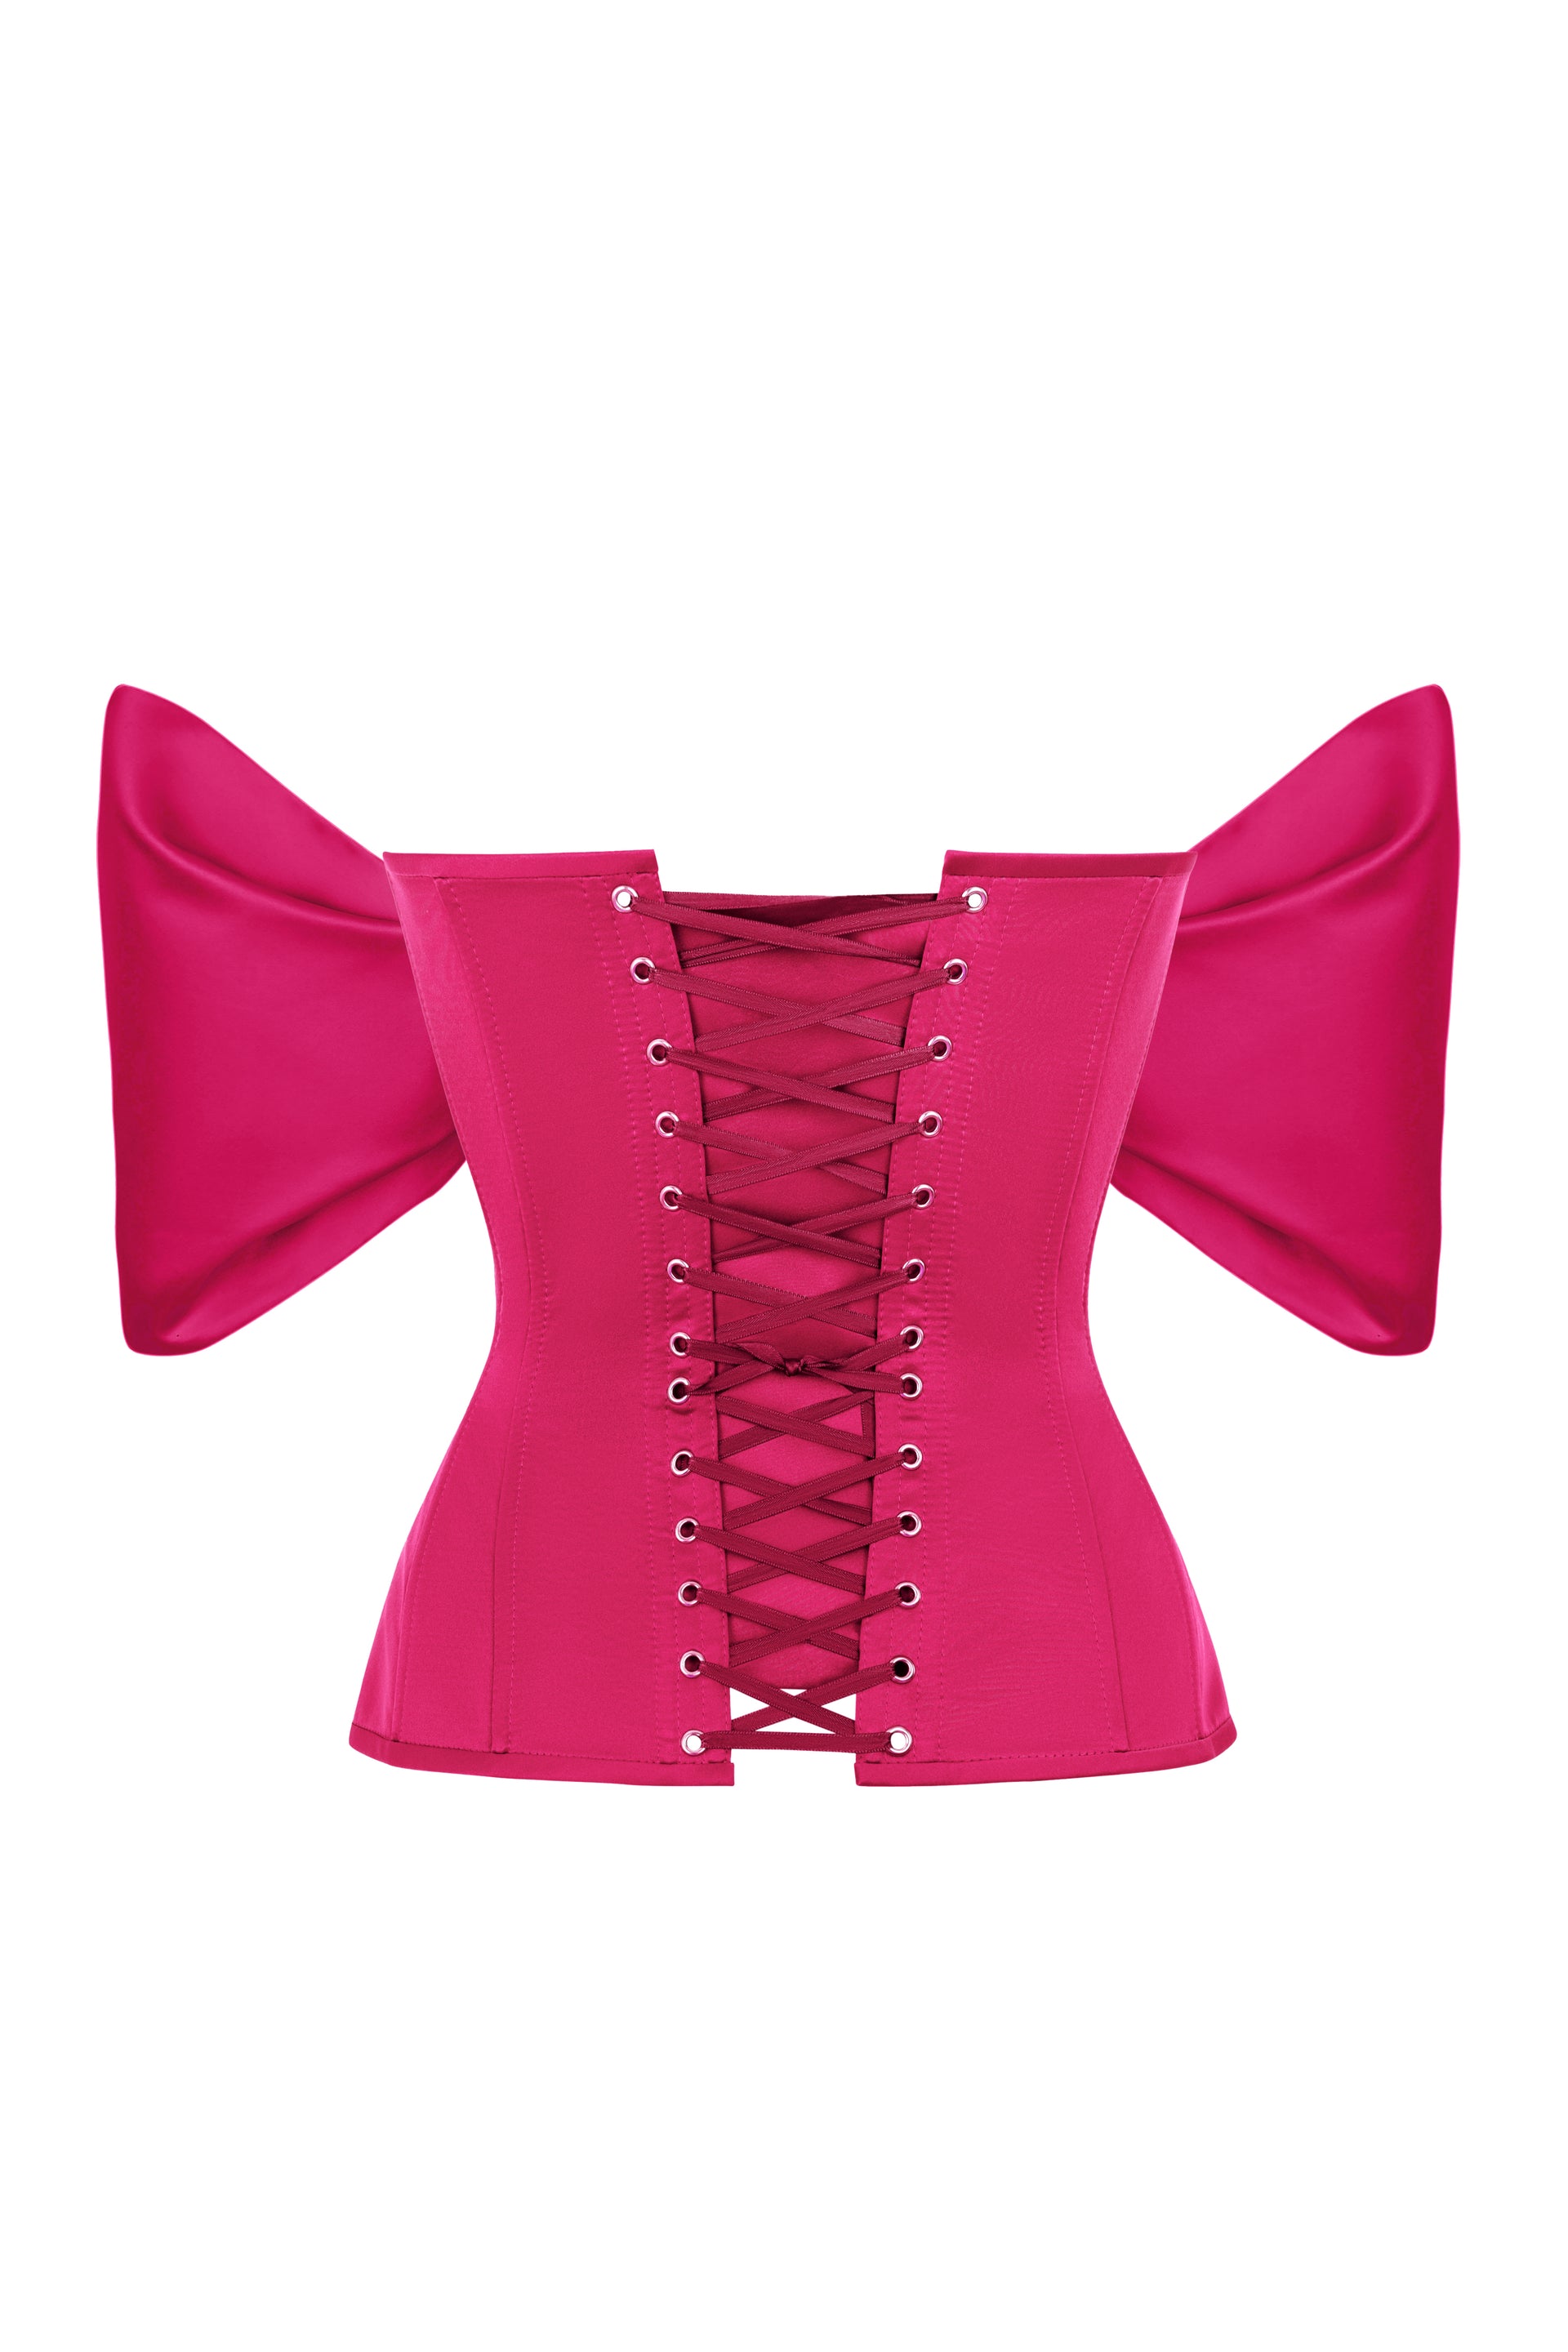 Shocking pink satin corset with detachable sleeves